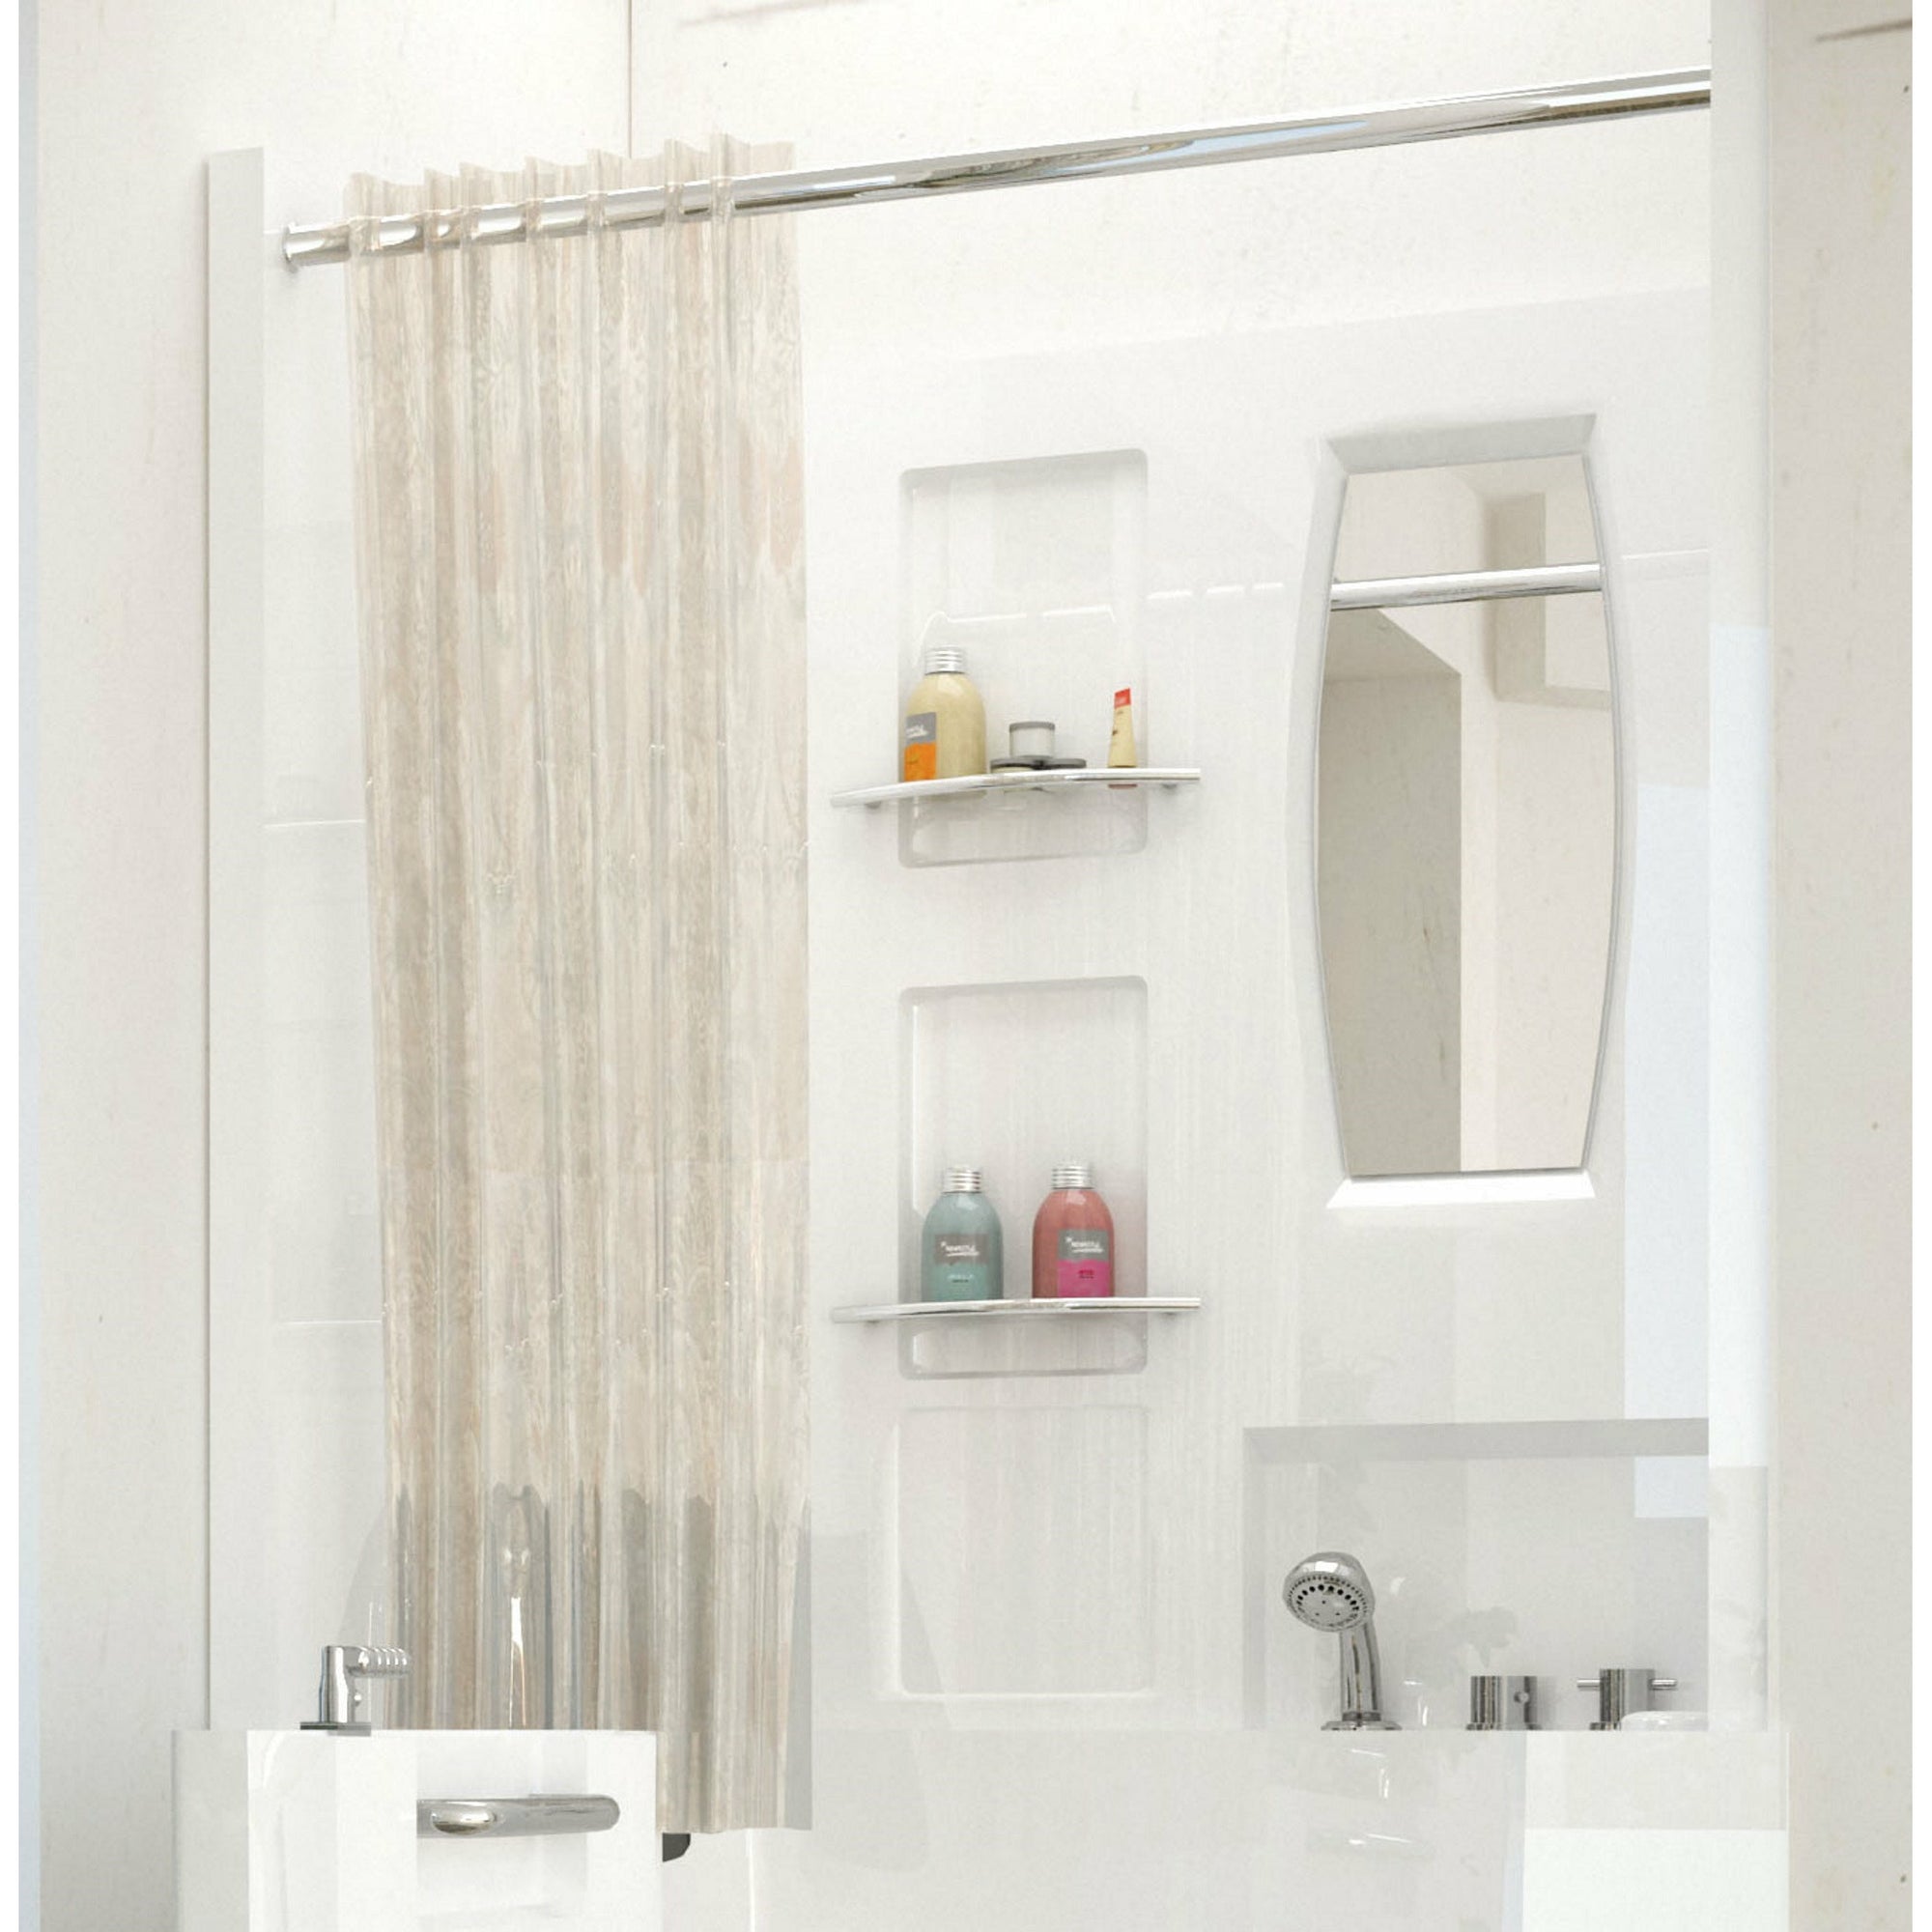 Meditub Shower Enclosure 31 x 40  3-Piece Walk-In Bathtub Surround in White - High grade marine fiberglass with acrylic coating - with molded shelves, built-in standing height mirror - 3140SEN - Vital Hydrotherapy